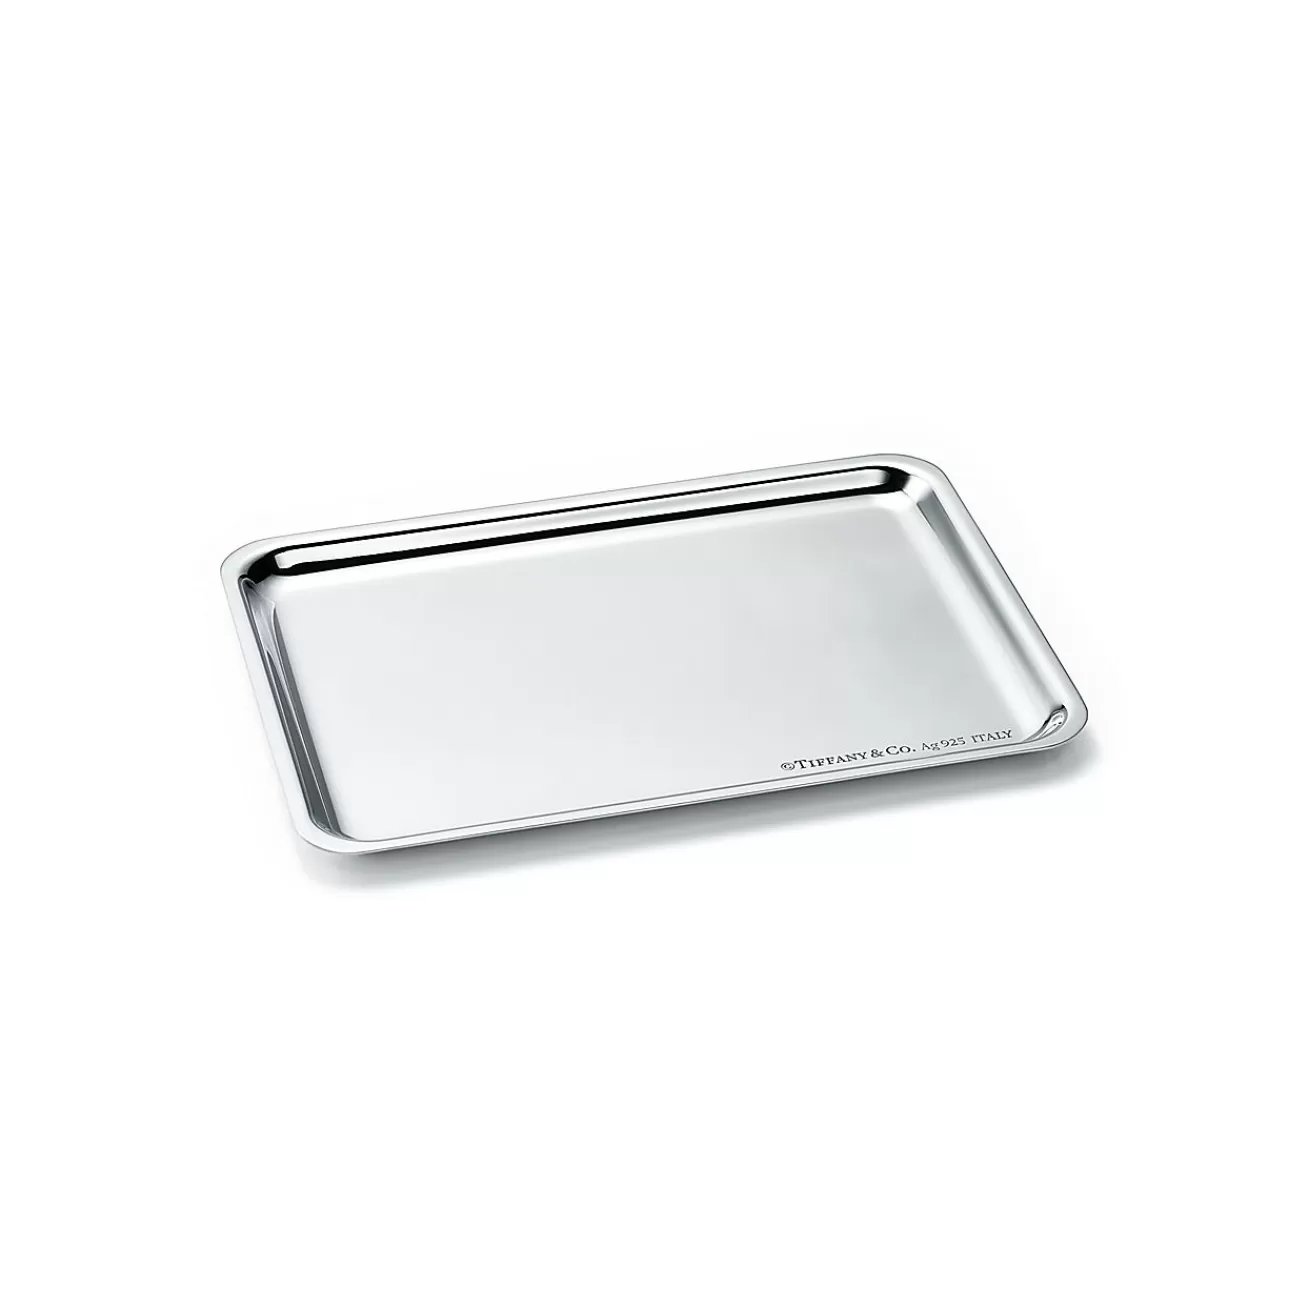 Tiffany & Co. Rectangular tray in sterling silver, 6 x 4.5". | ^ Gifts to Personalize | Decor